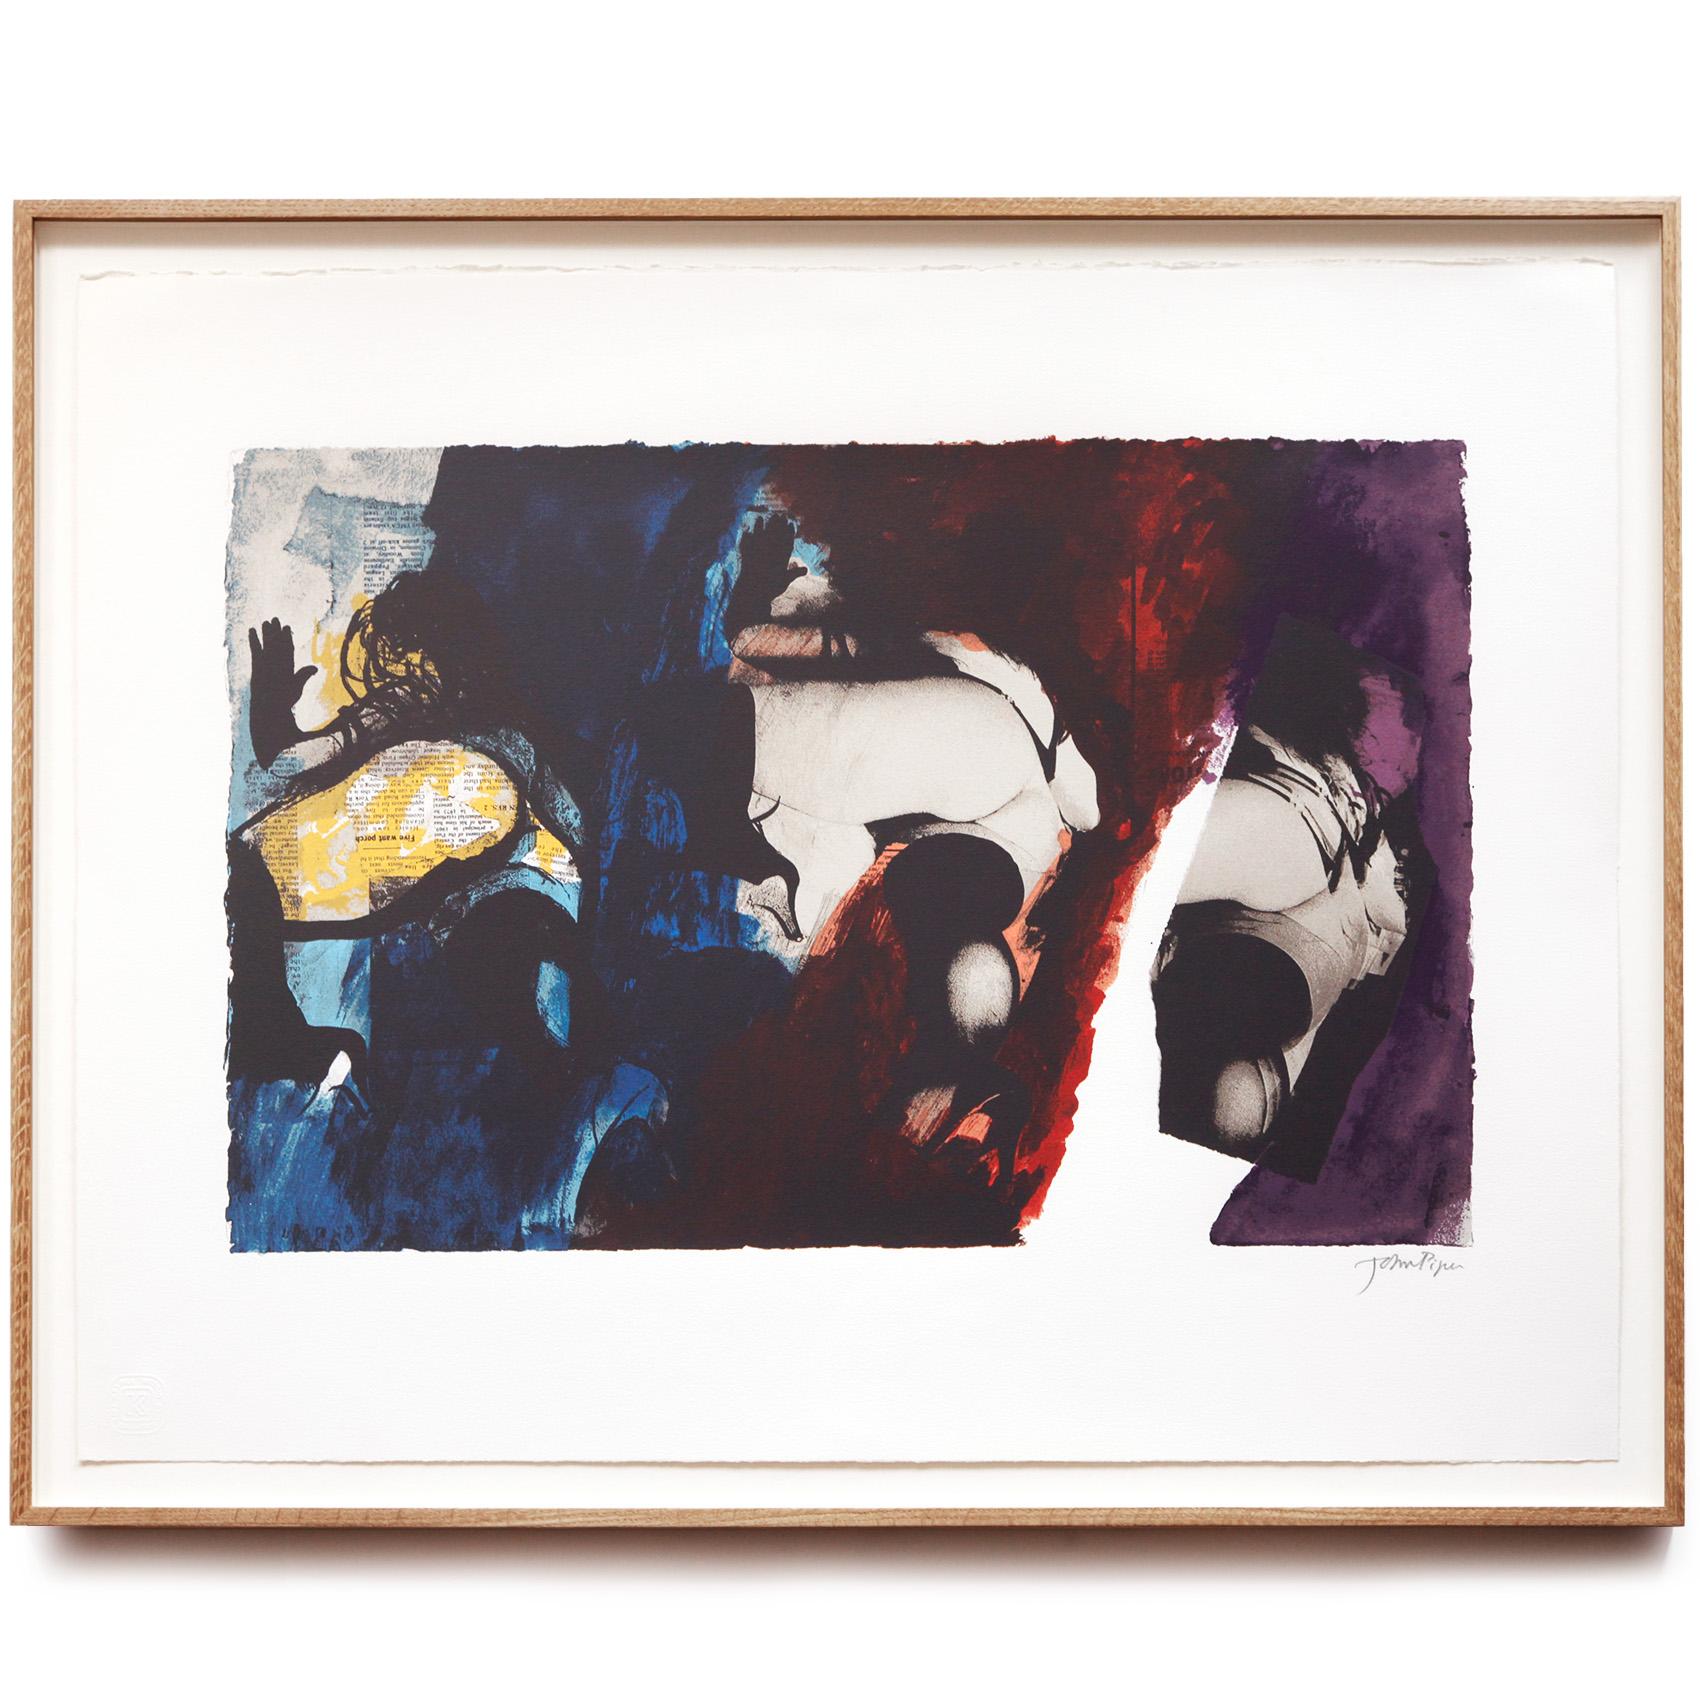 Eye and Camera, Red, Blue and Yellow - Print by John Piper